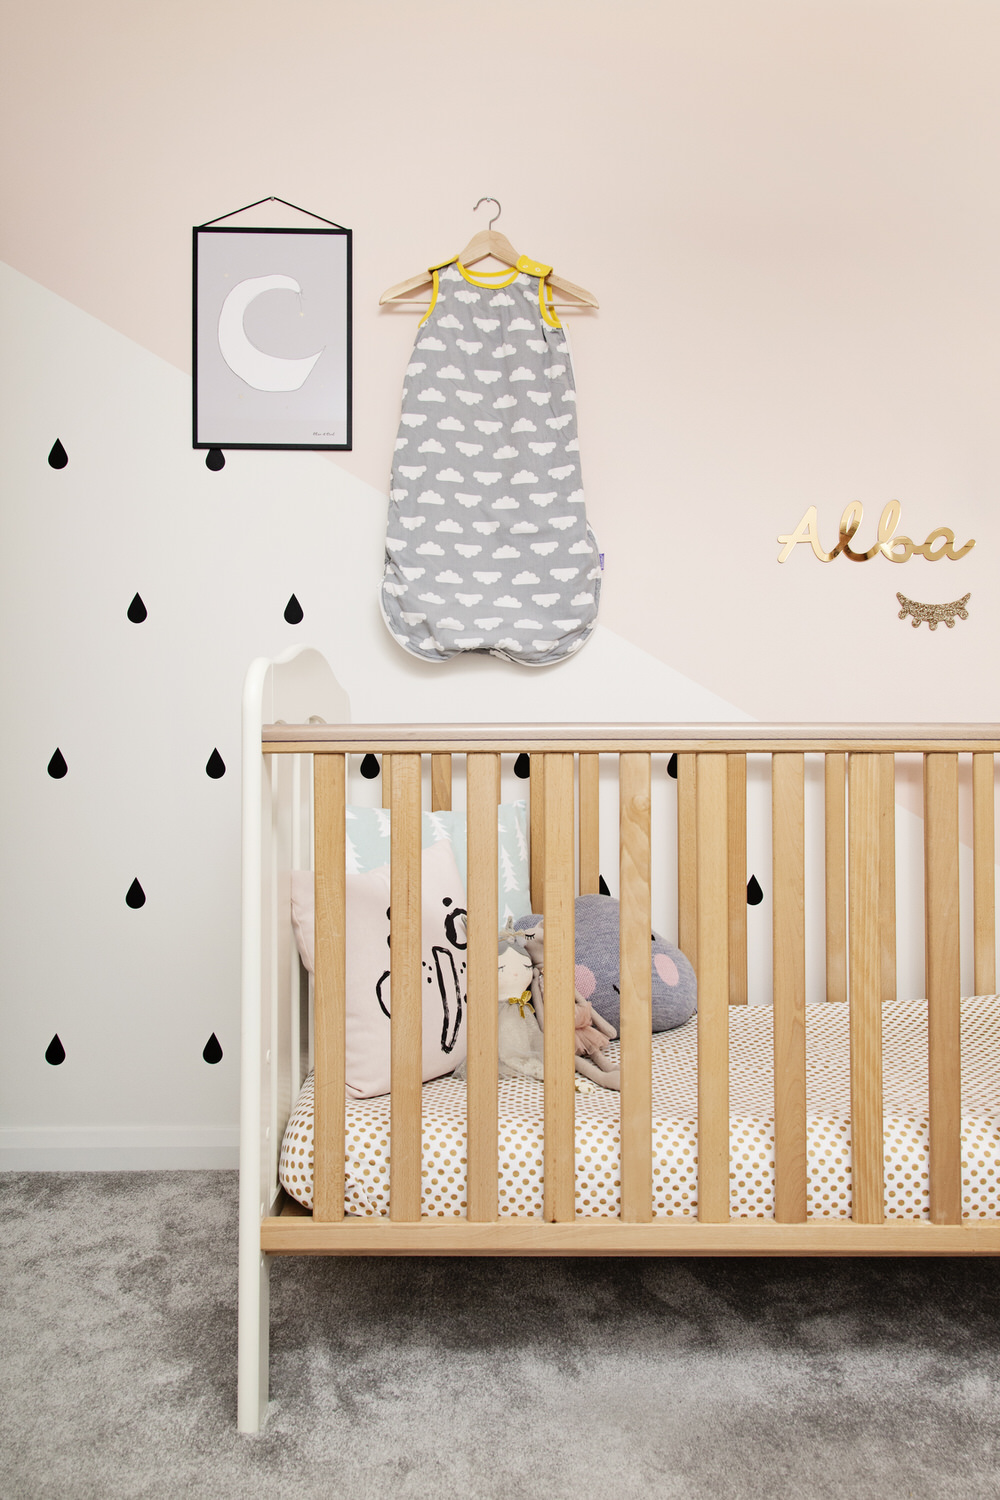 Wooden Cot | Monochrome Wall Stickers | A pastel and monochrome nursery for a little girl with details from The Modern Nursery.